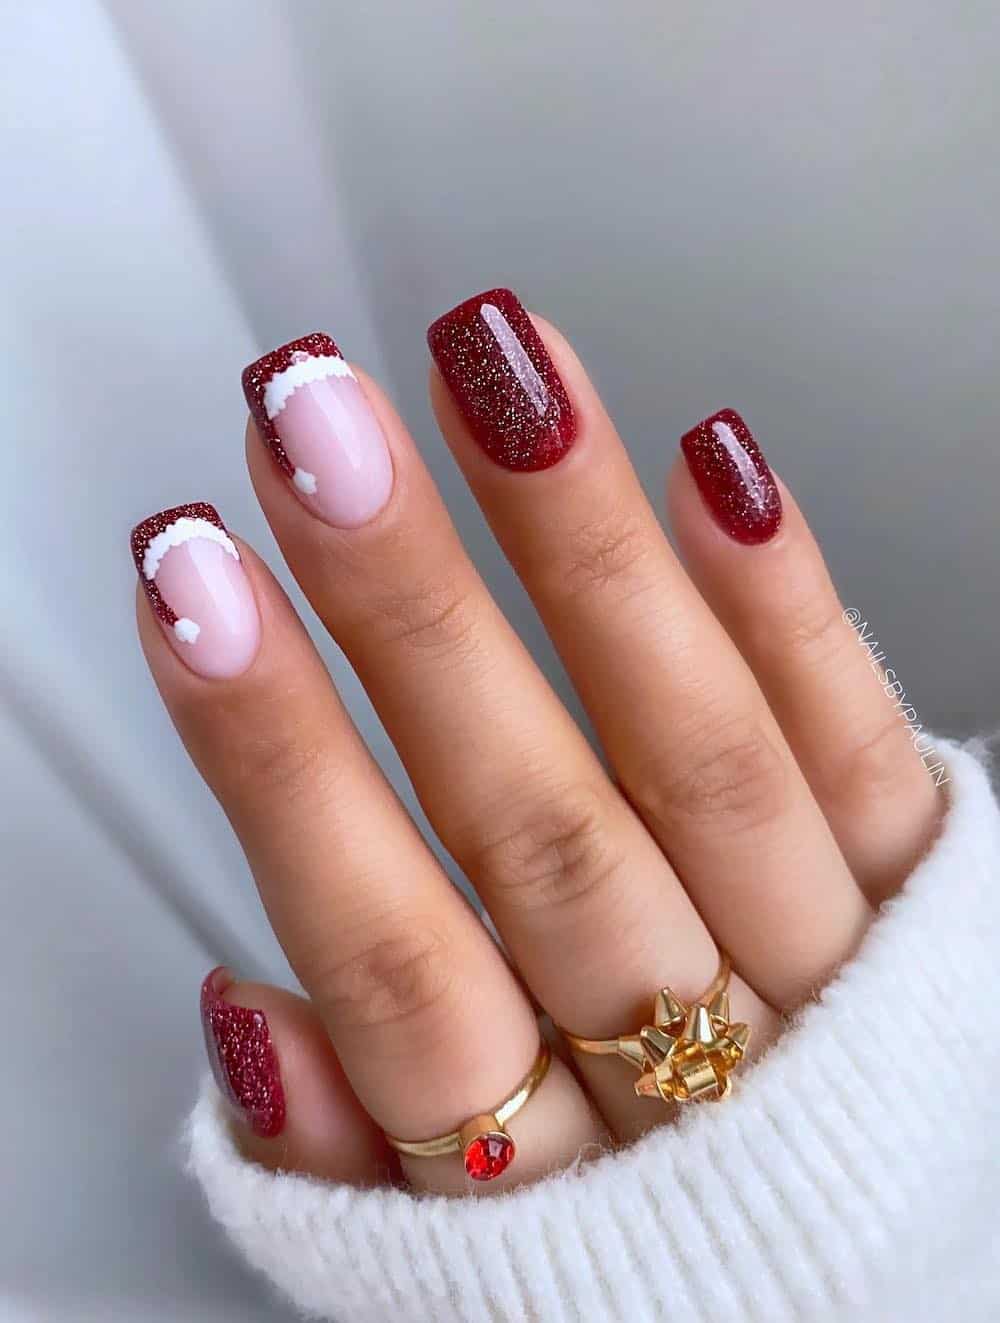 Red glitter manicure with Santa hat french tips.